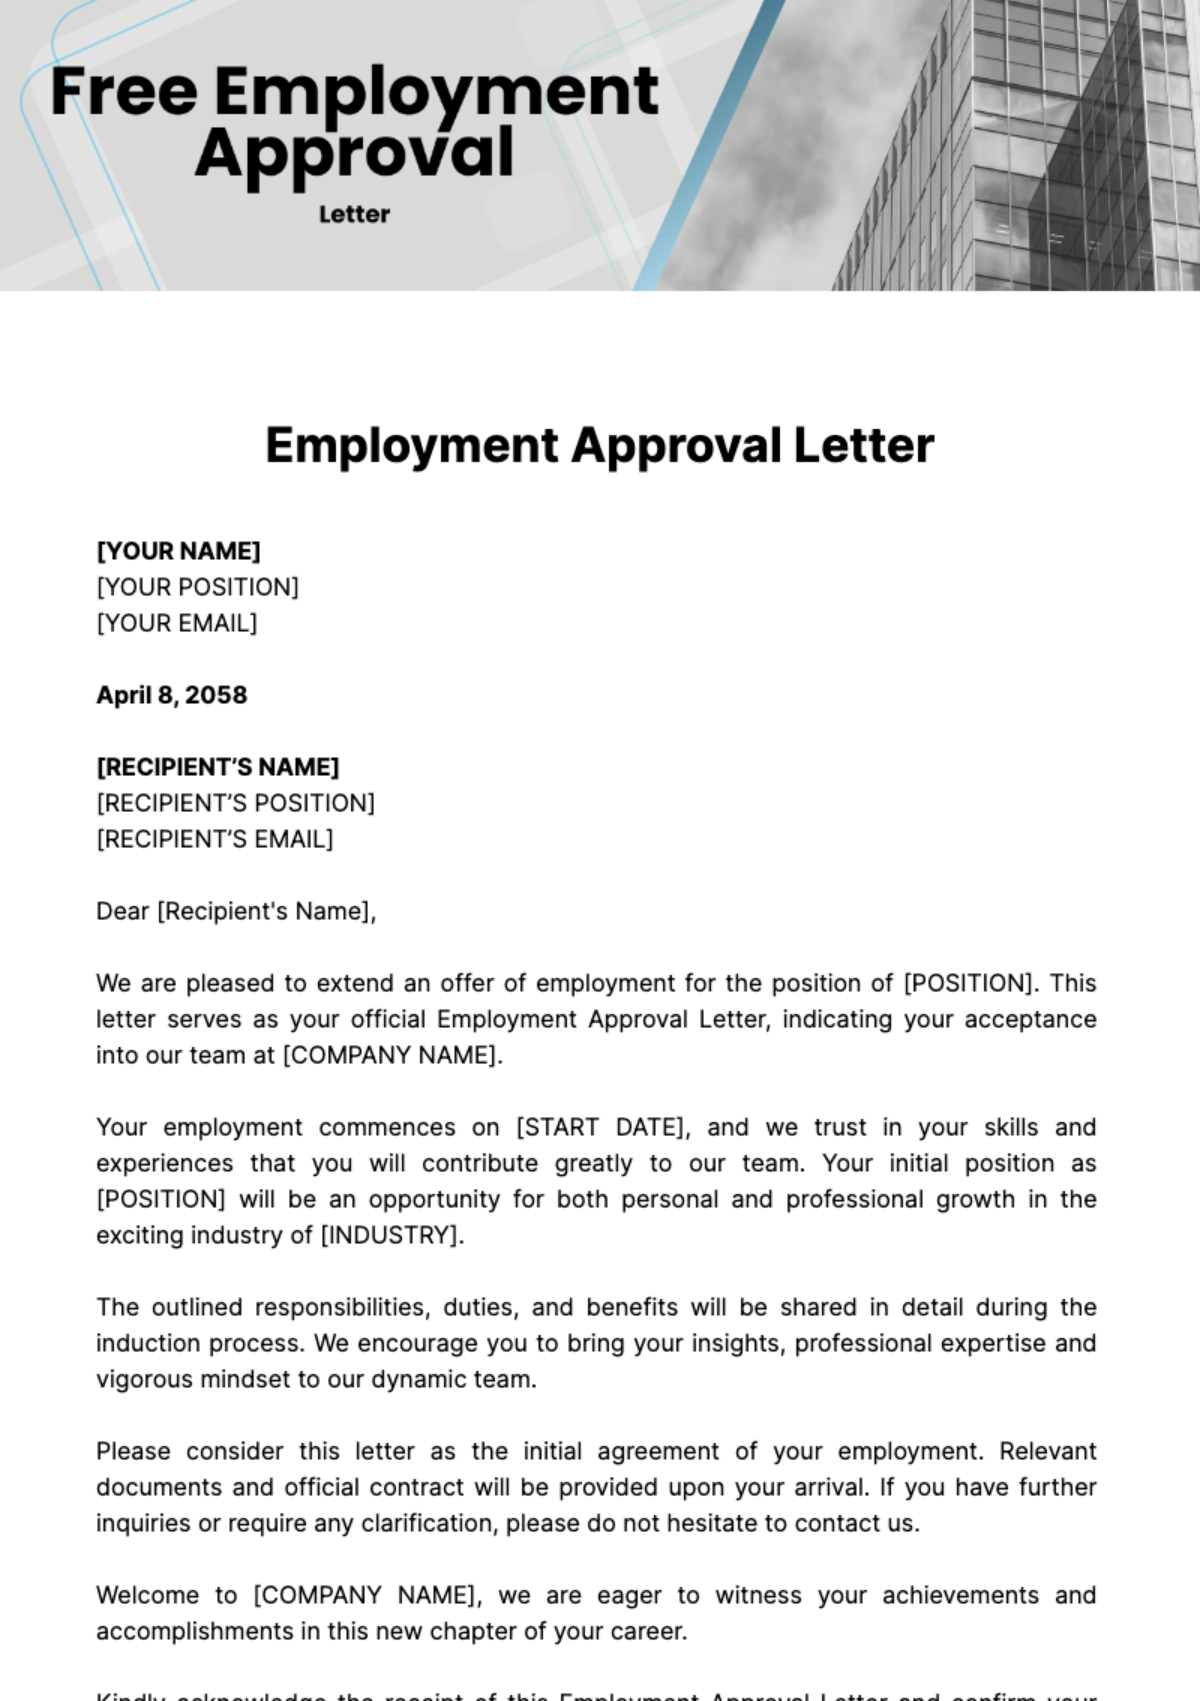 Free Employment Approval Letter Template